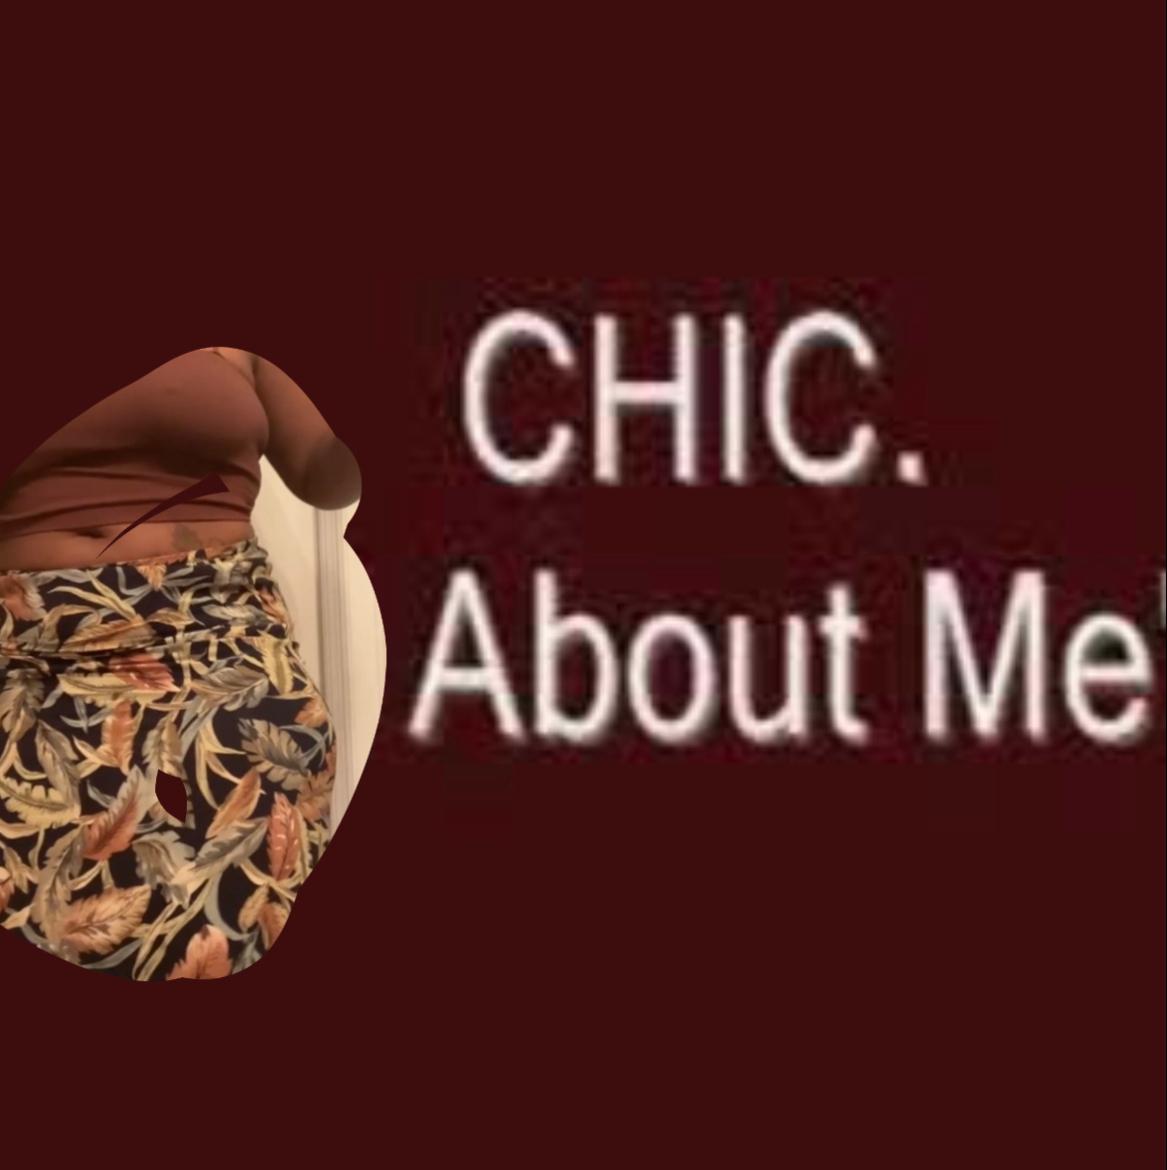 CHIC ABOUT ME 's images